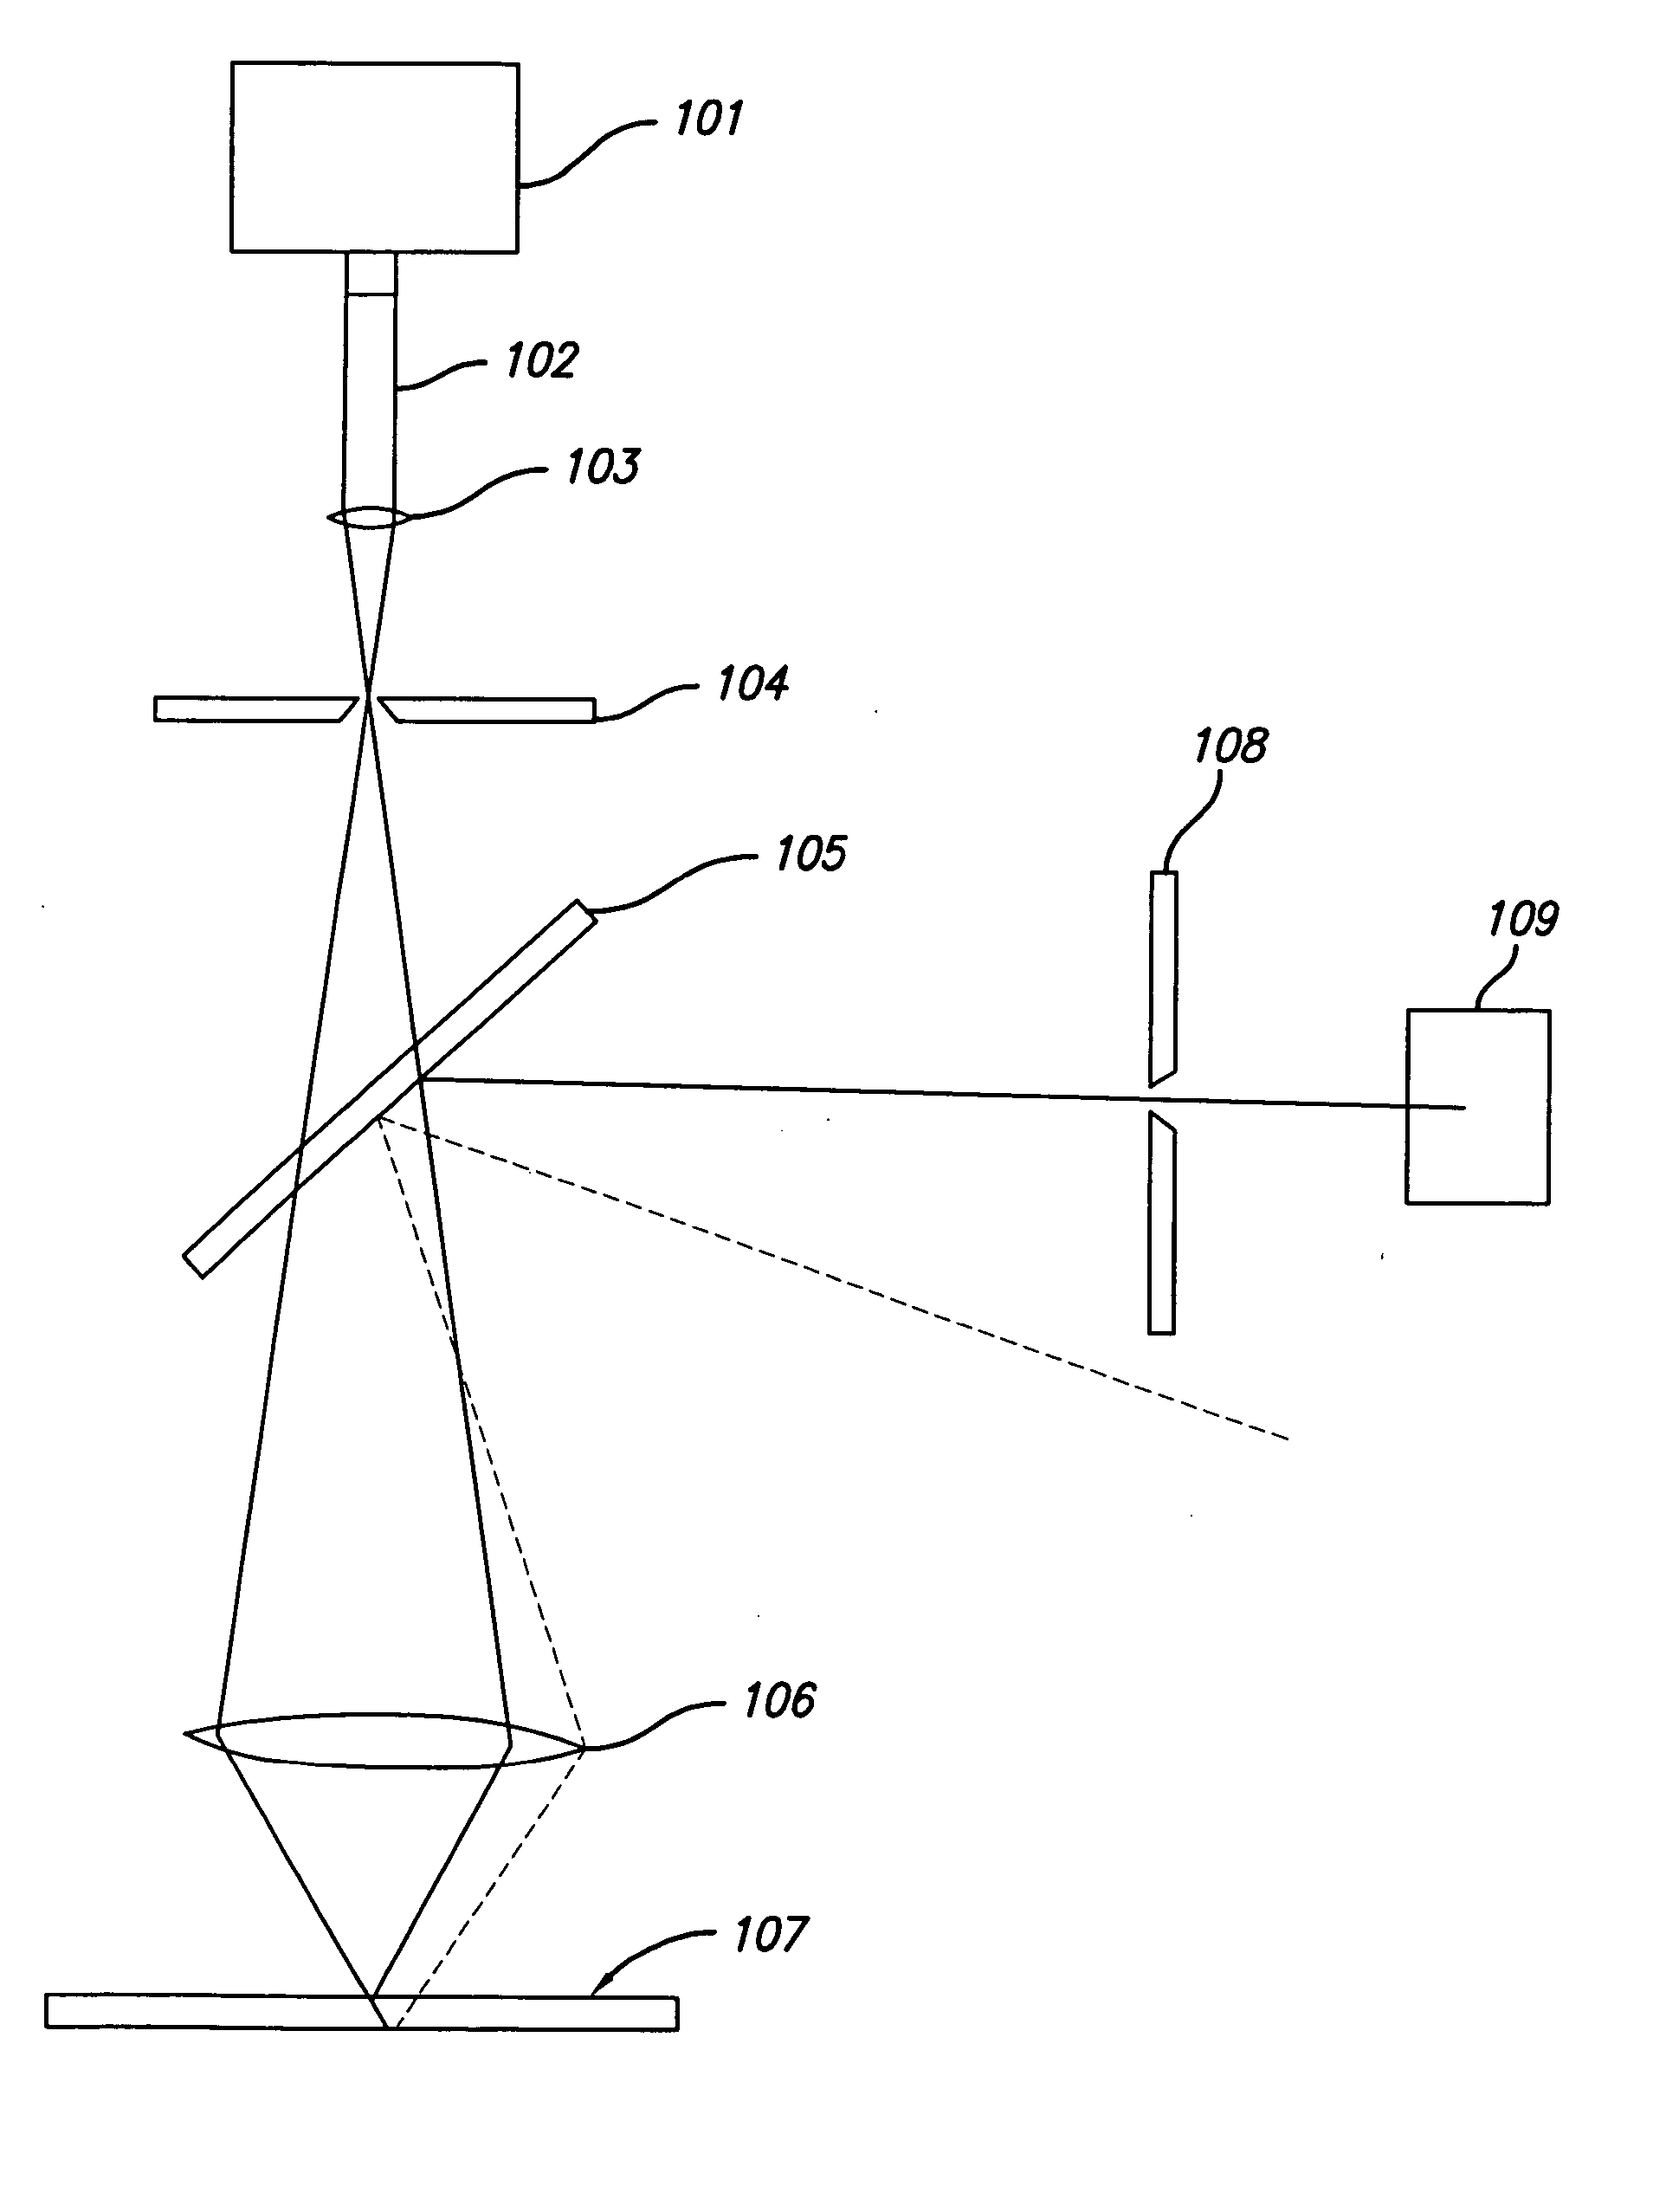 Confocal wafer inspection method and apparatus